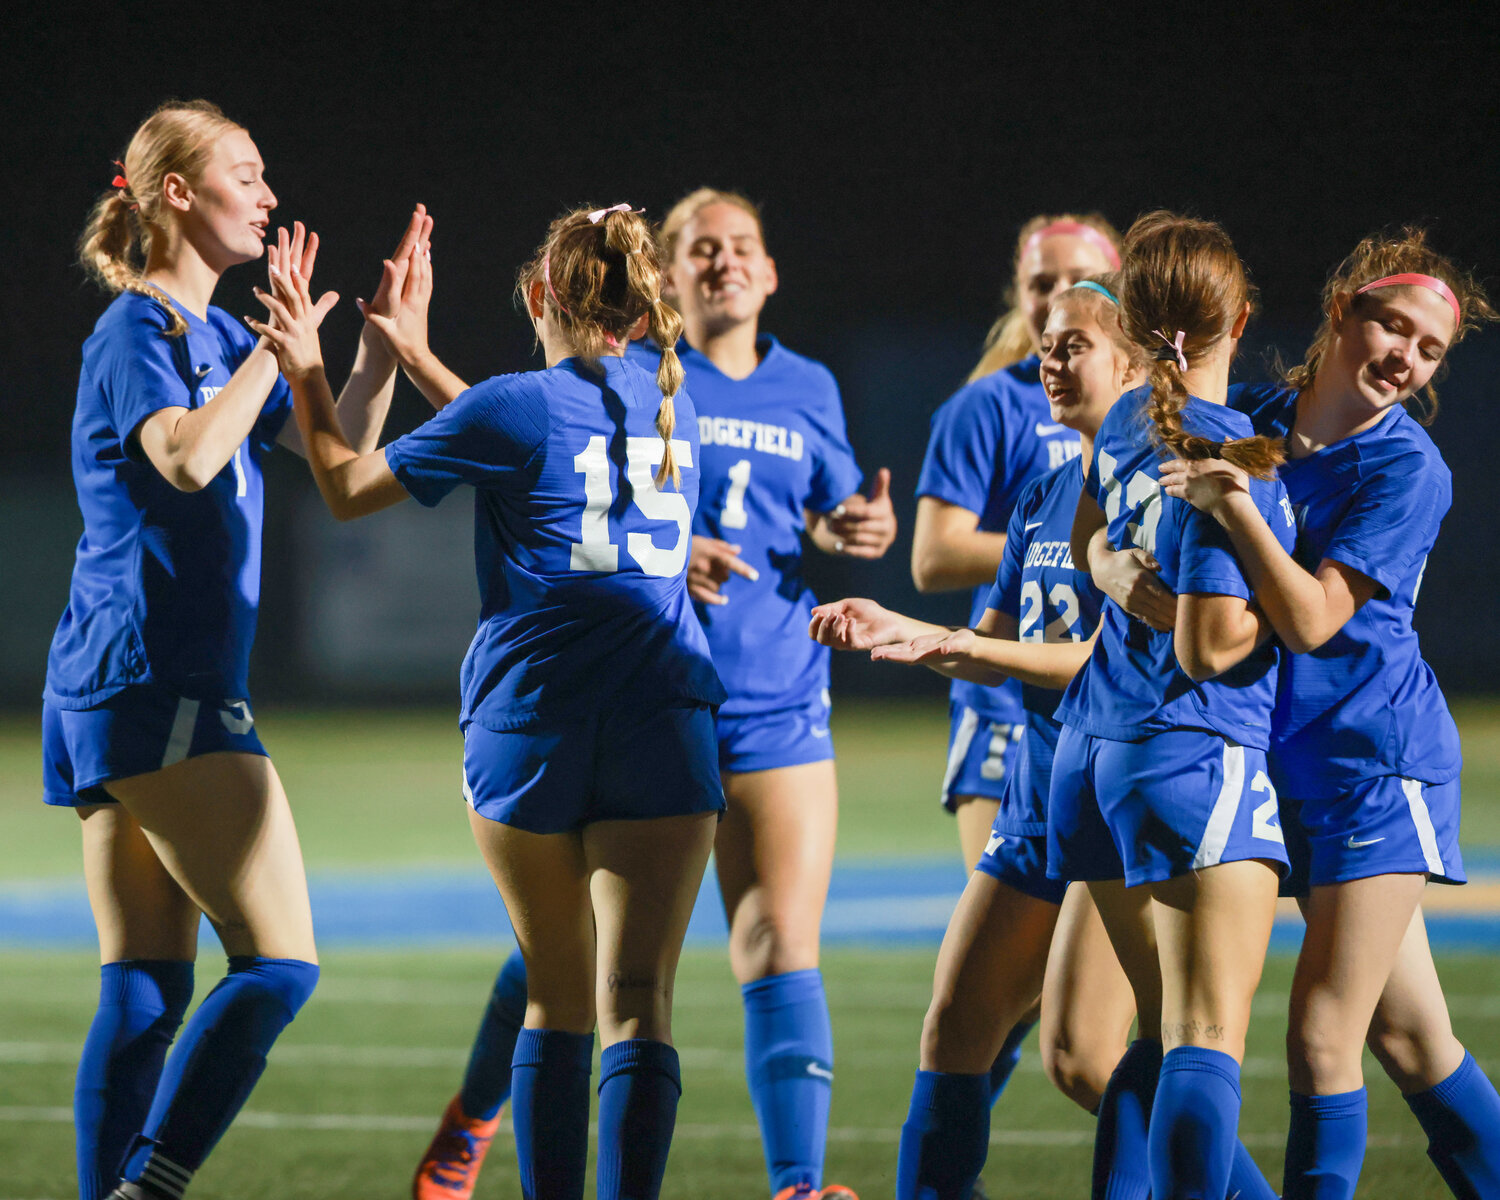 The Spudders celebrate a goal scored by Victoria Lasch, No. 15, during the Spudders’ 2-0 opening round win against the Aberdeen Bobcats on Tuesday, Oct. 31.